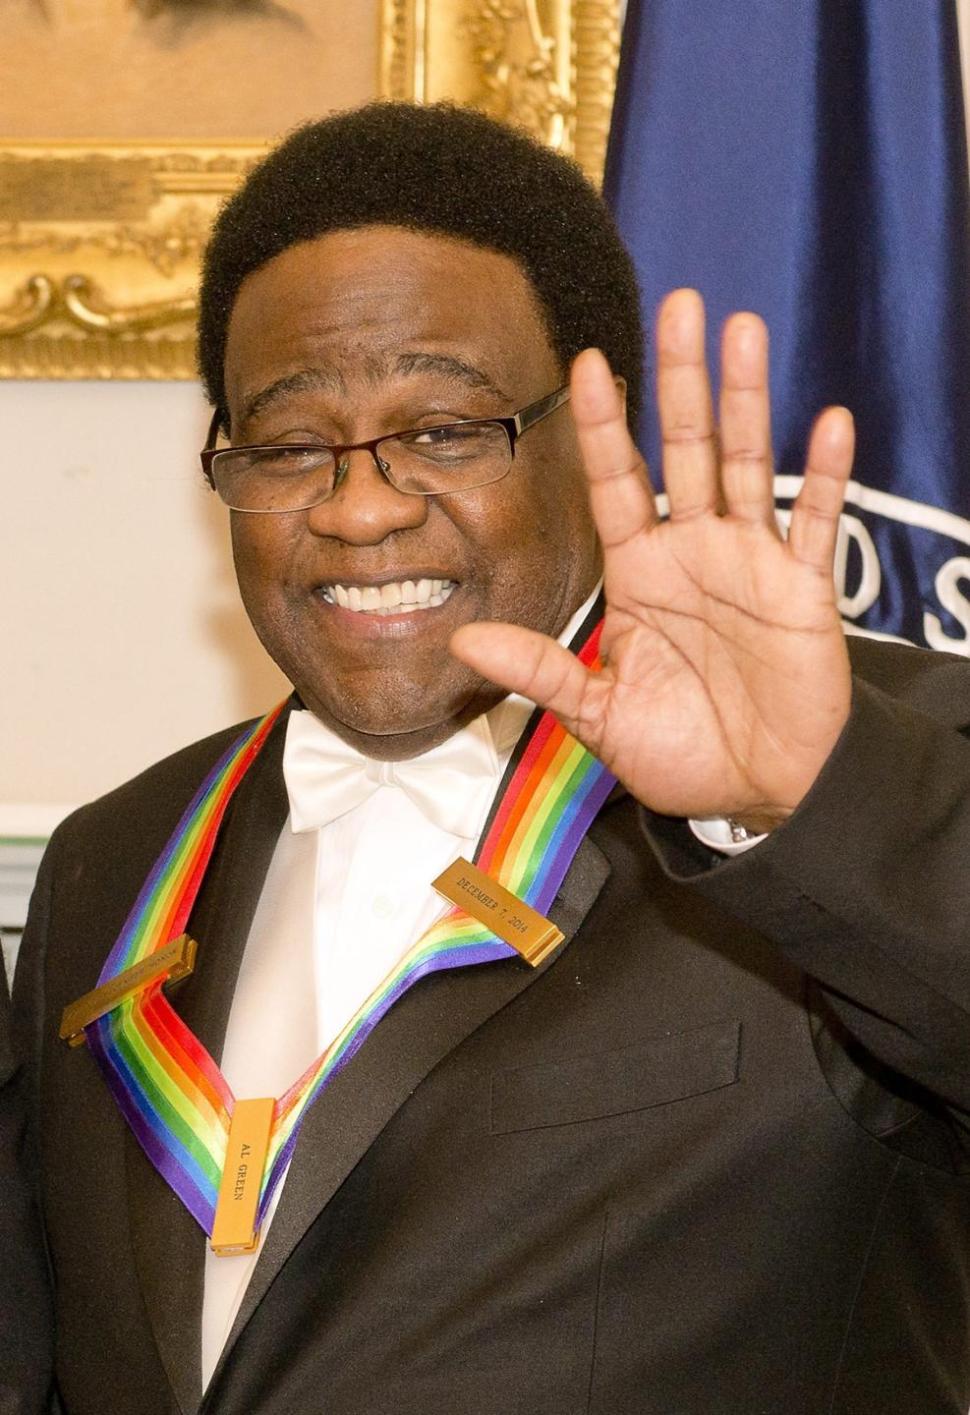 Singer Al Green waves to the audience during Sunday's event.